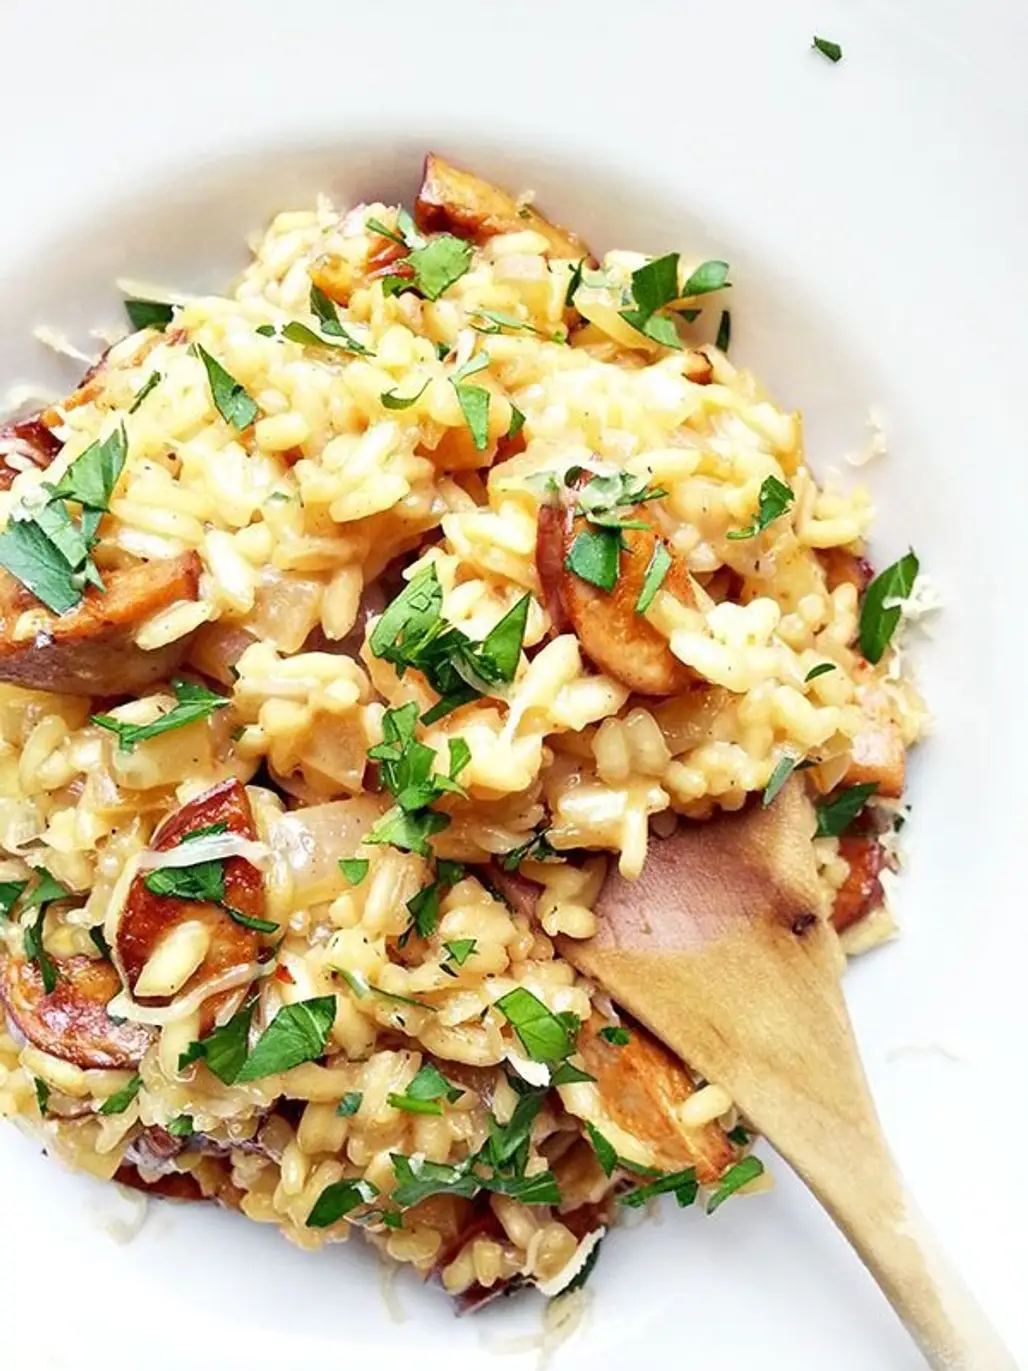 Beer Risotto with Spicy Sausage and Gouda